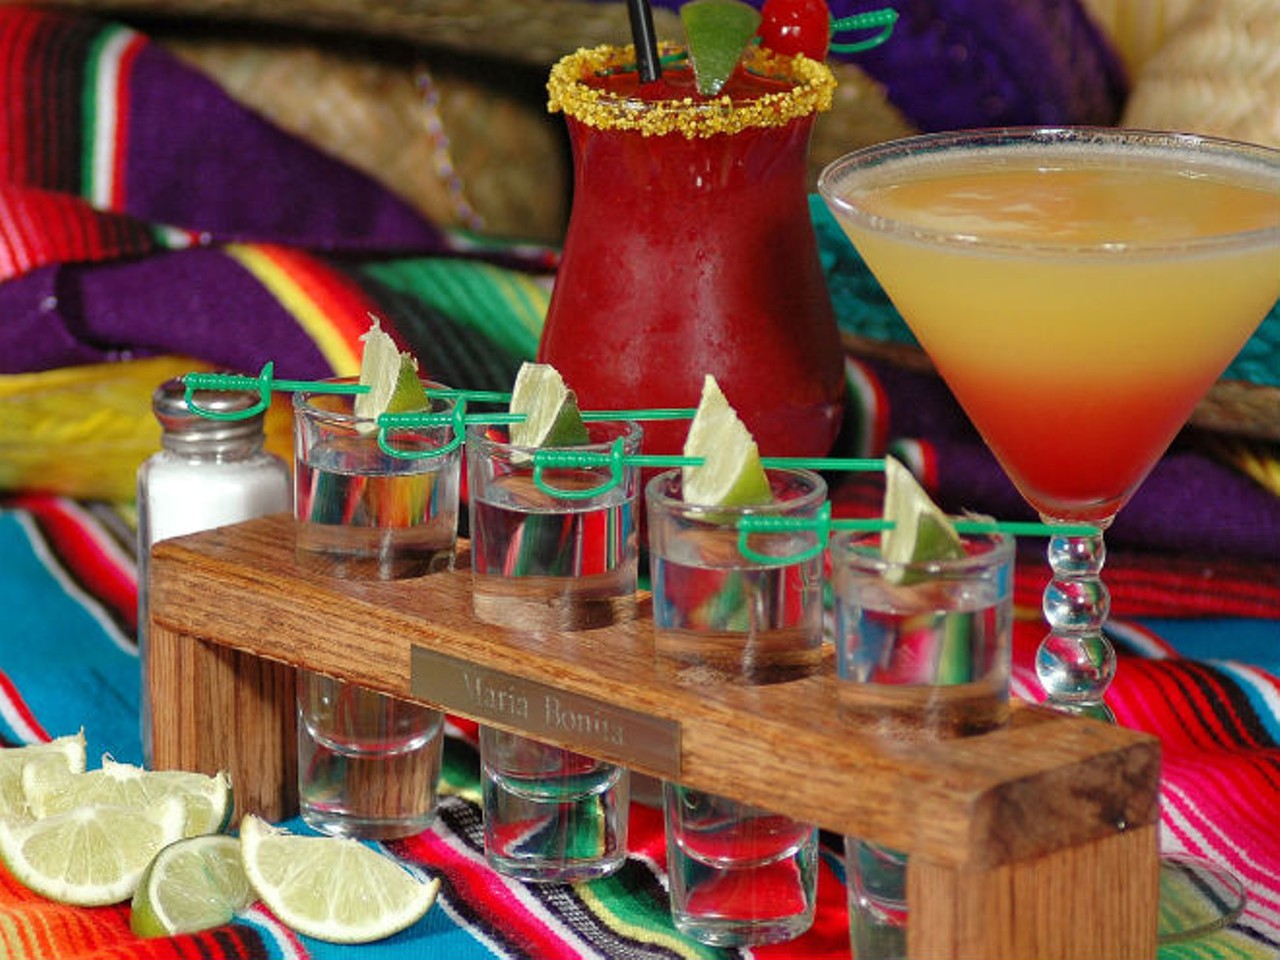 Maybe you want to celebrate National Margarita Day a little late? Maria Bonita serves $1 house margaritas on Monday (with the purchase of a meal, of course.)
via